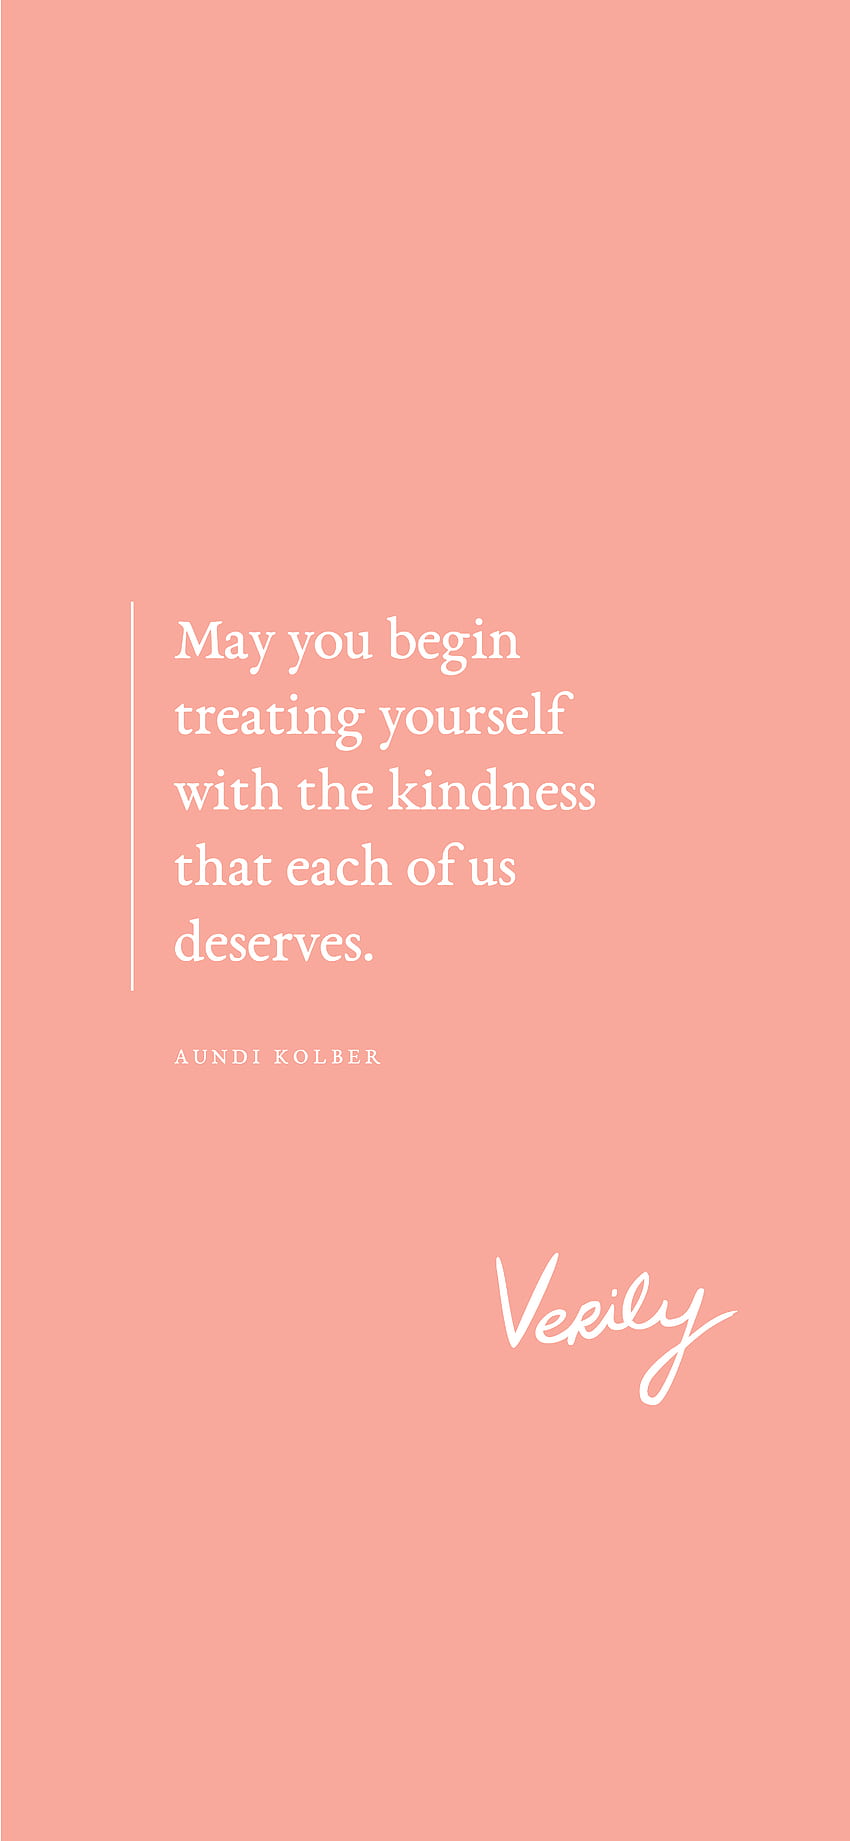 July 8 12, 2019 Daily Dose Verily, Treat People With Kindness HD phone wallpaper